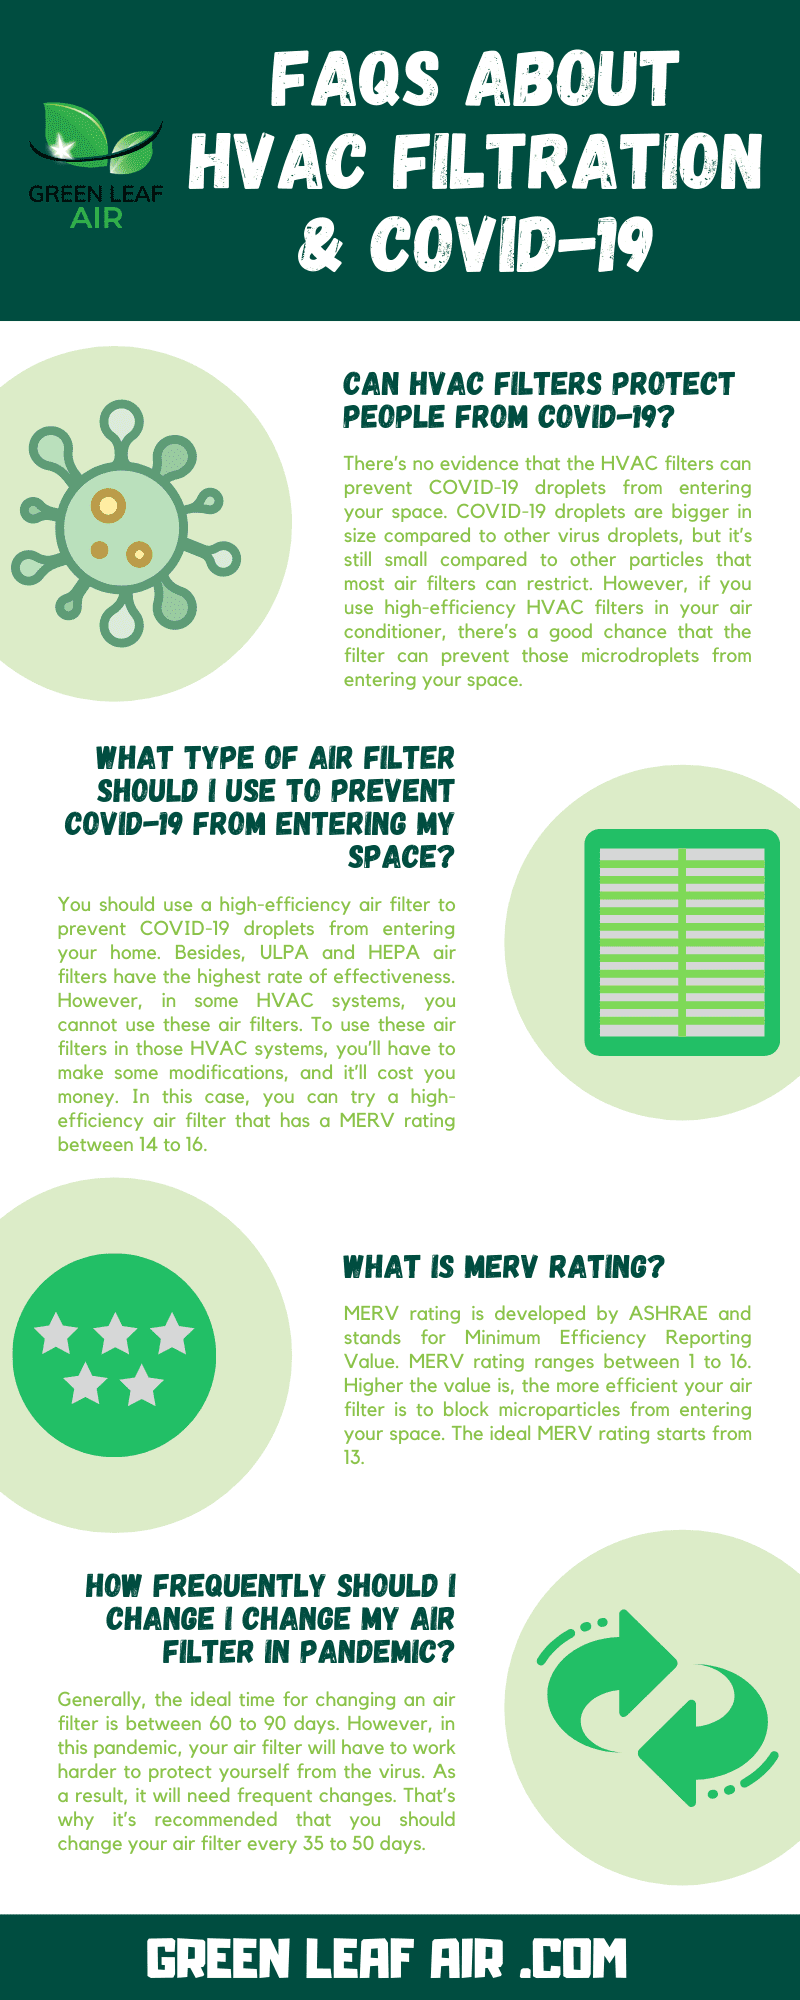 FAQs about HVAC Filtration & COVID-19